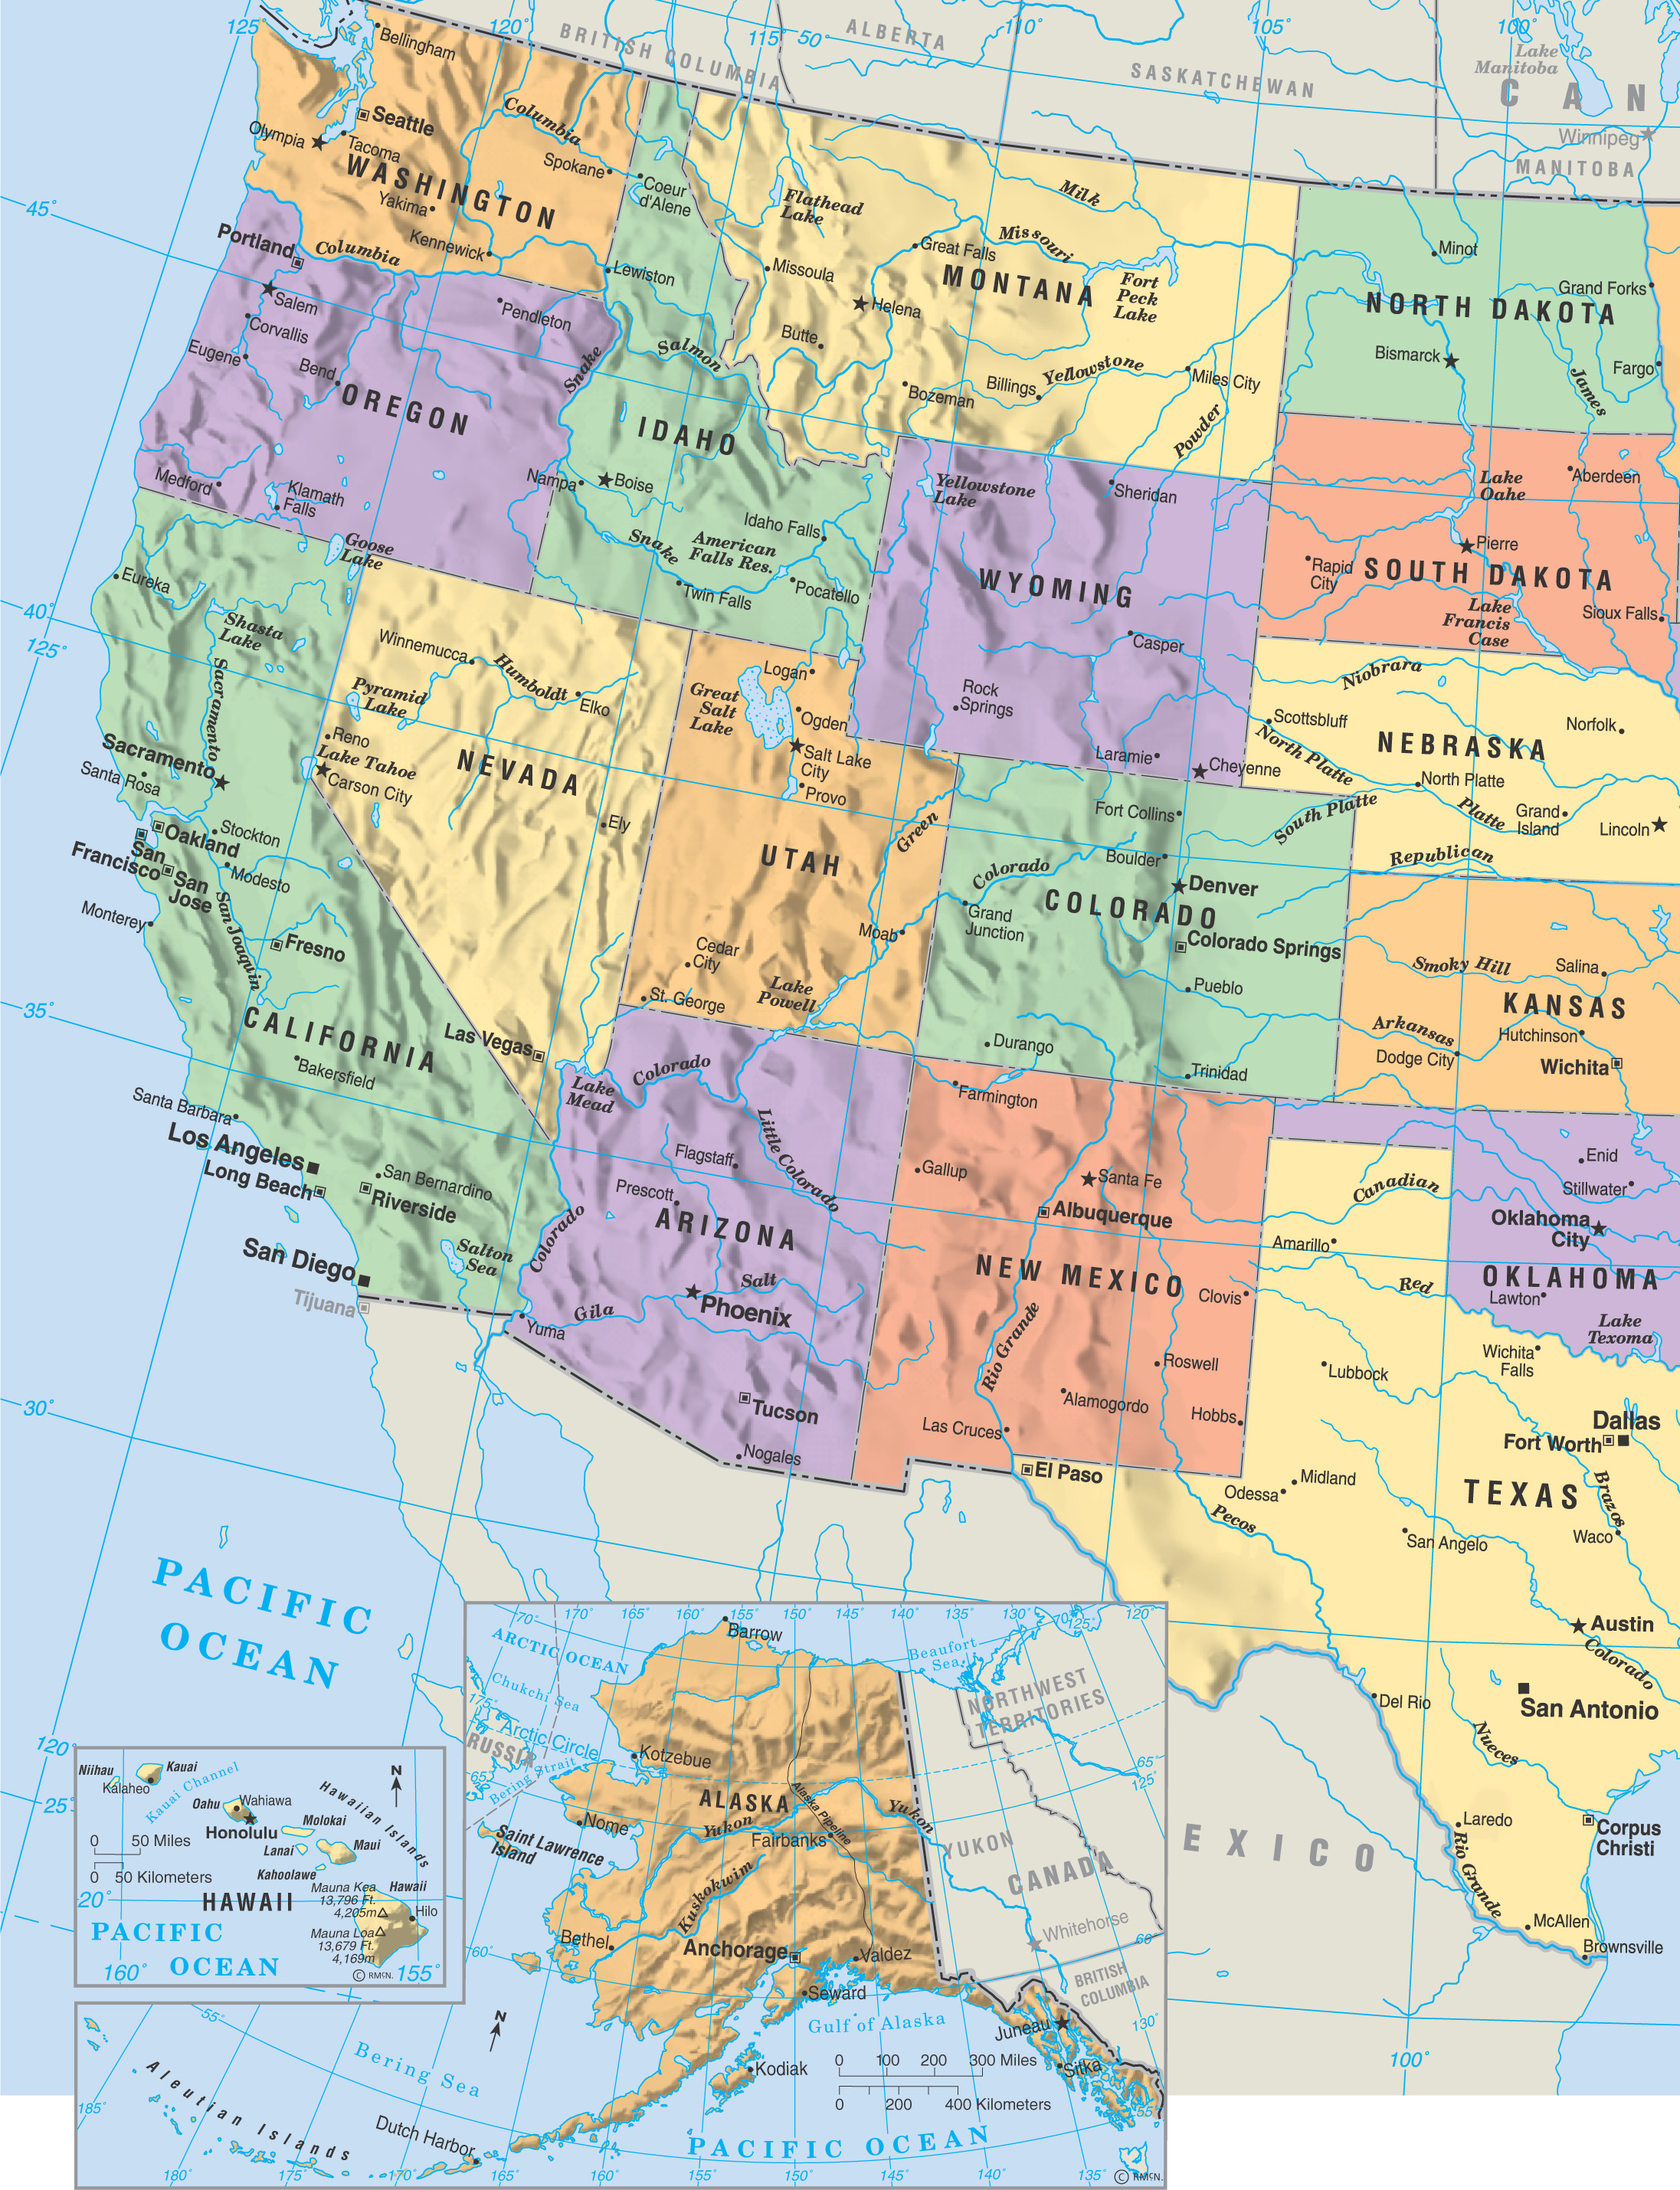 political map of United States shows state borders, capitals and major cites